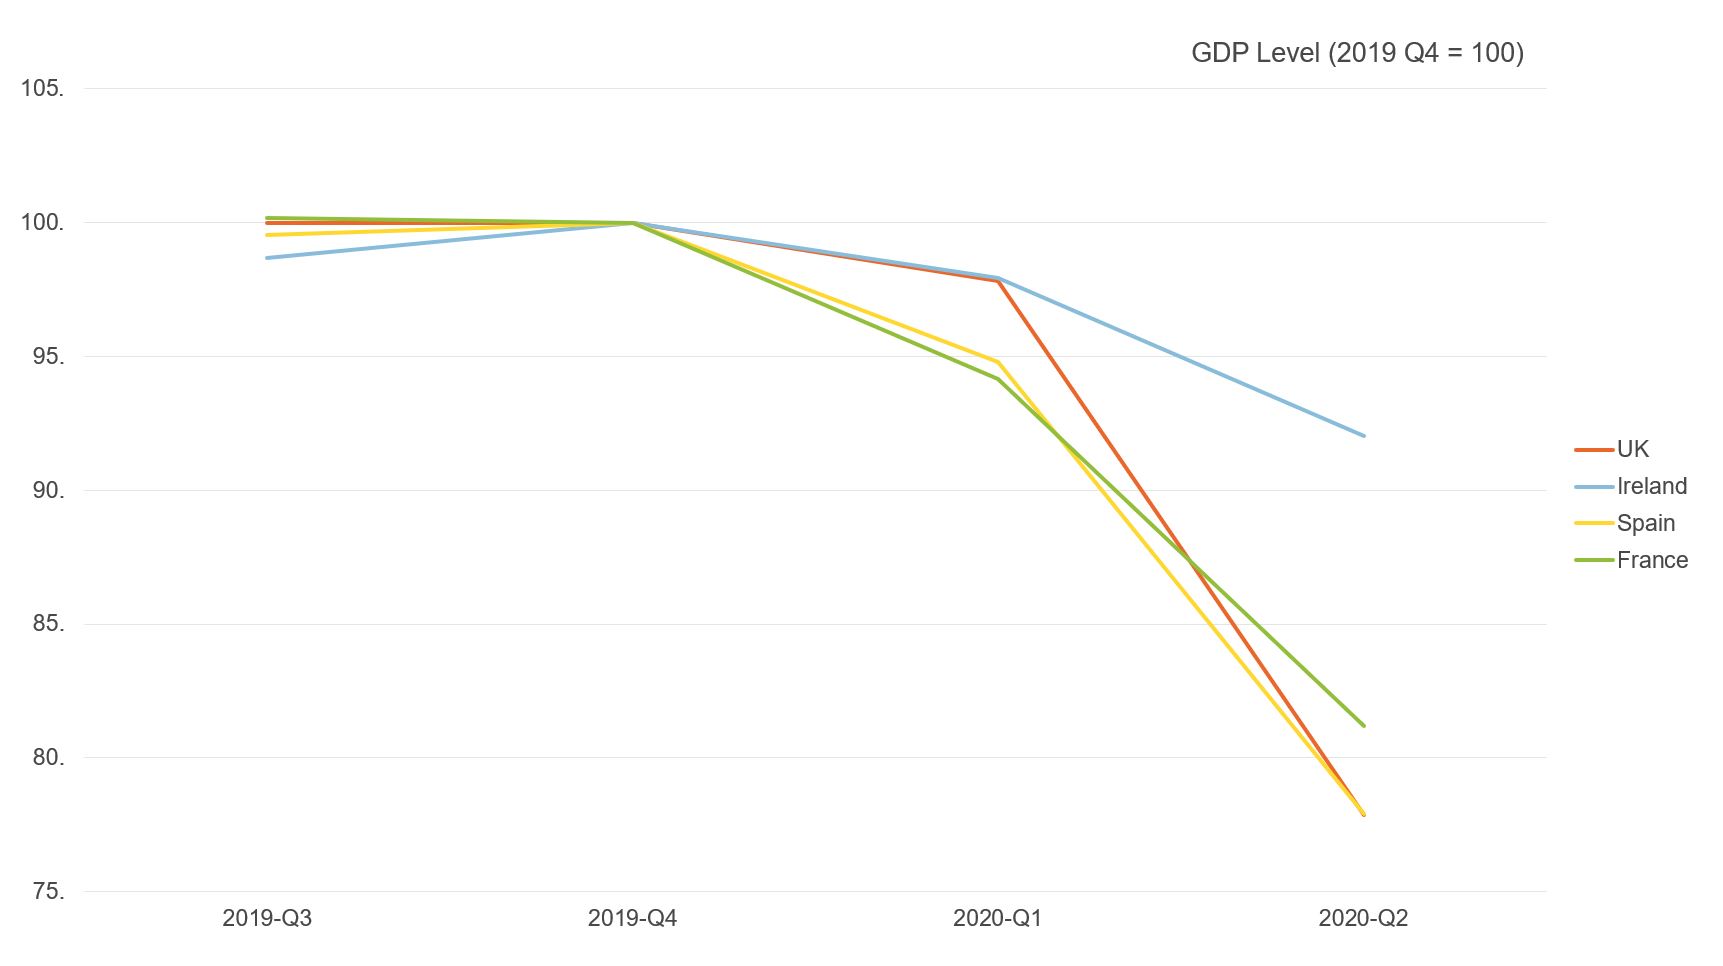 Figure comparing the level of GDP across the UK, Ireland, Spain & France